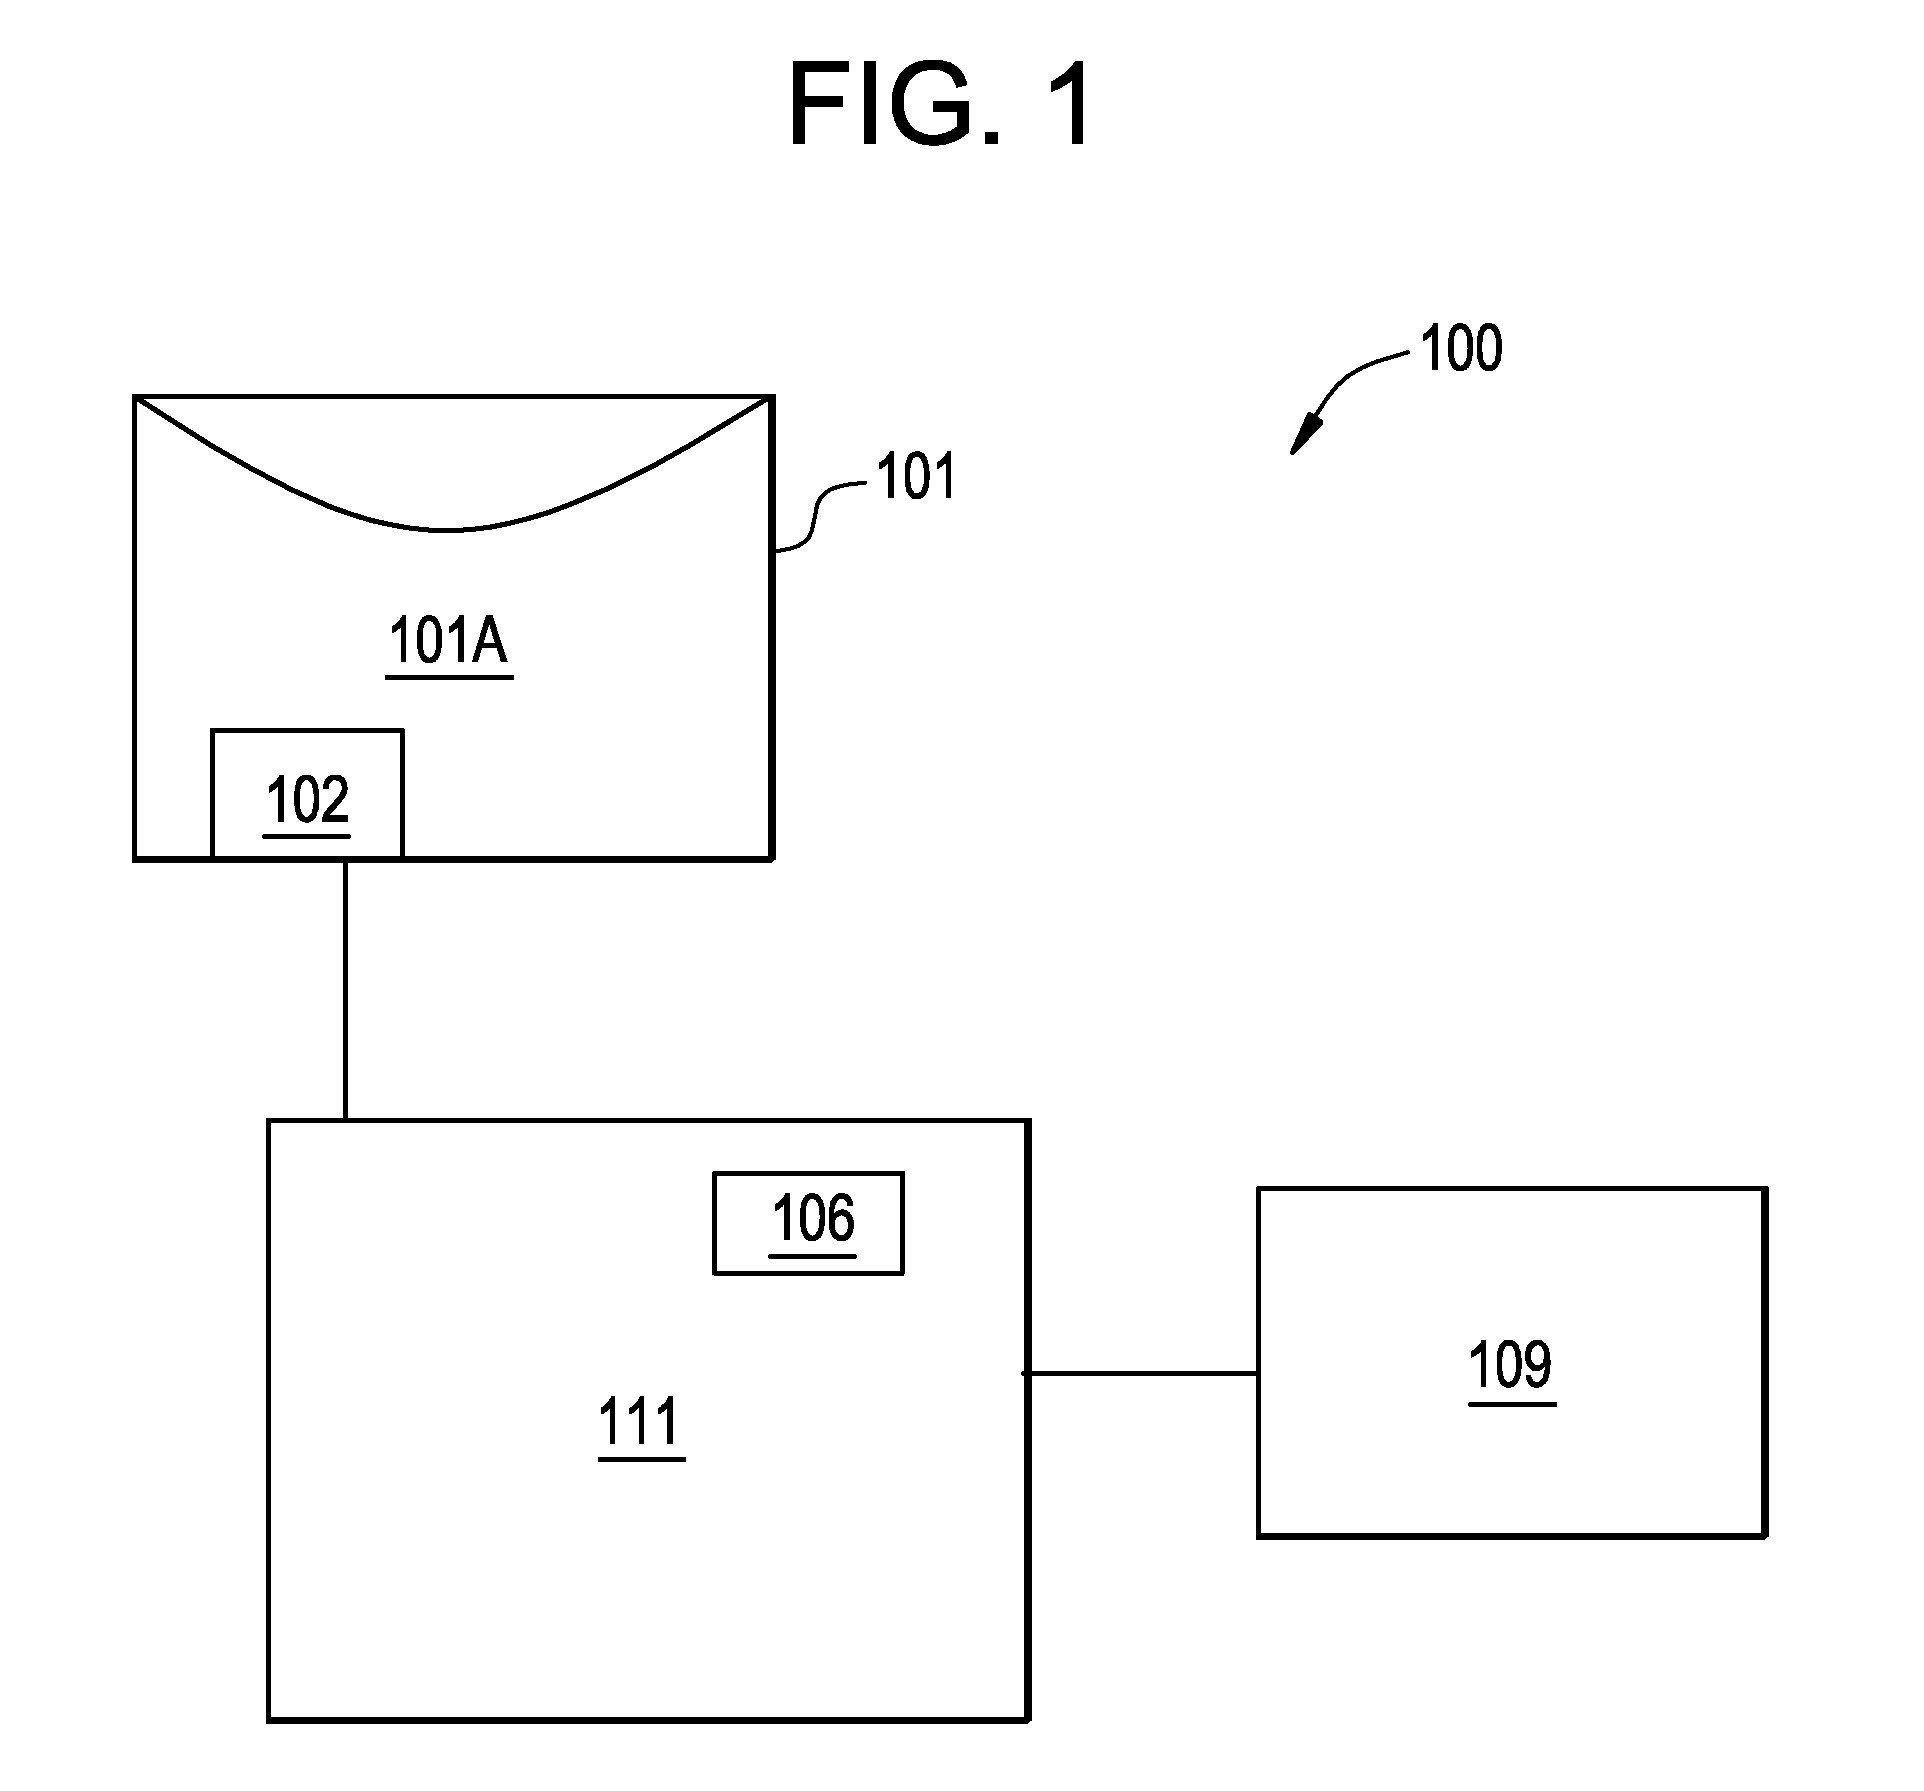 Method for preventing an unauthorized use of disposable bioprocess components